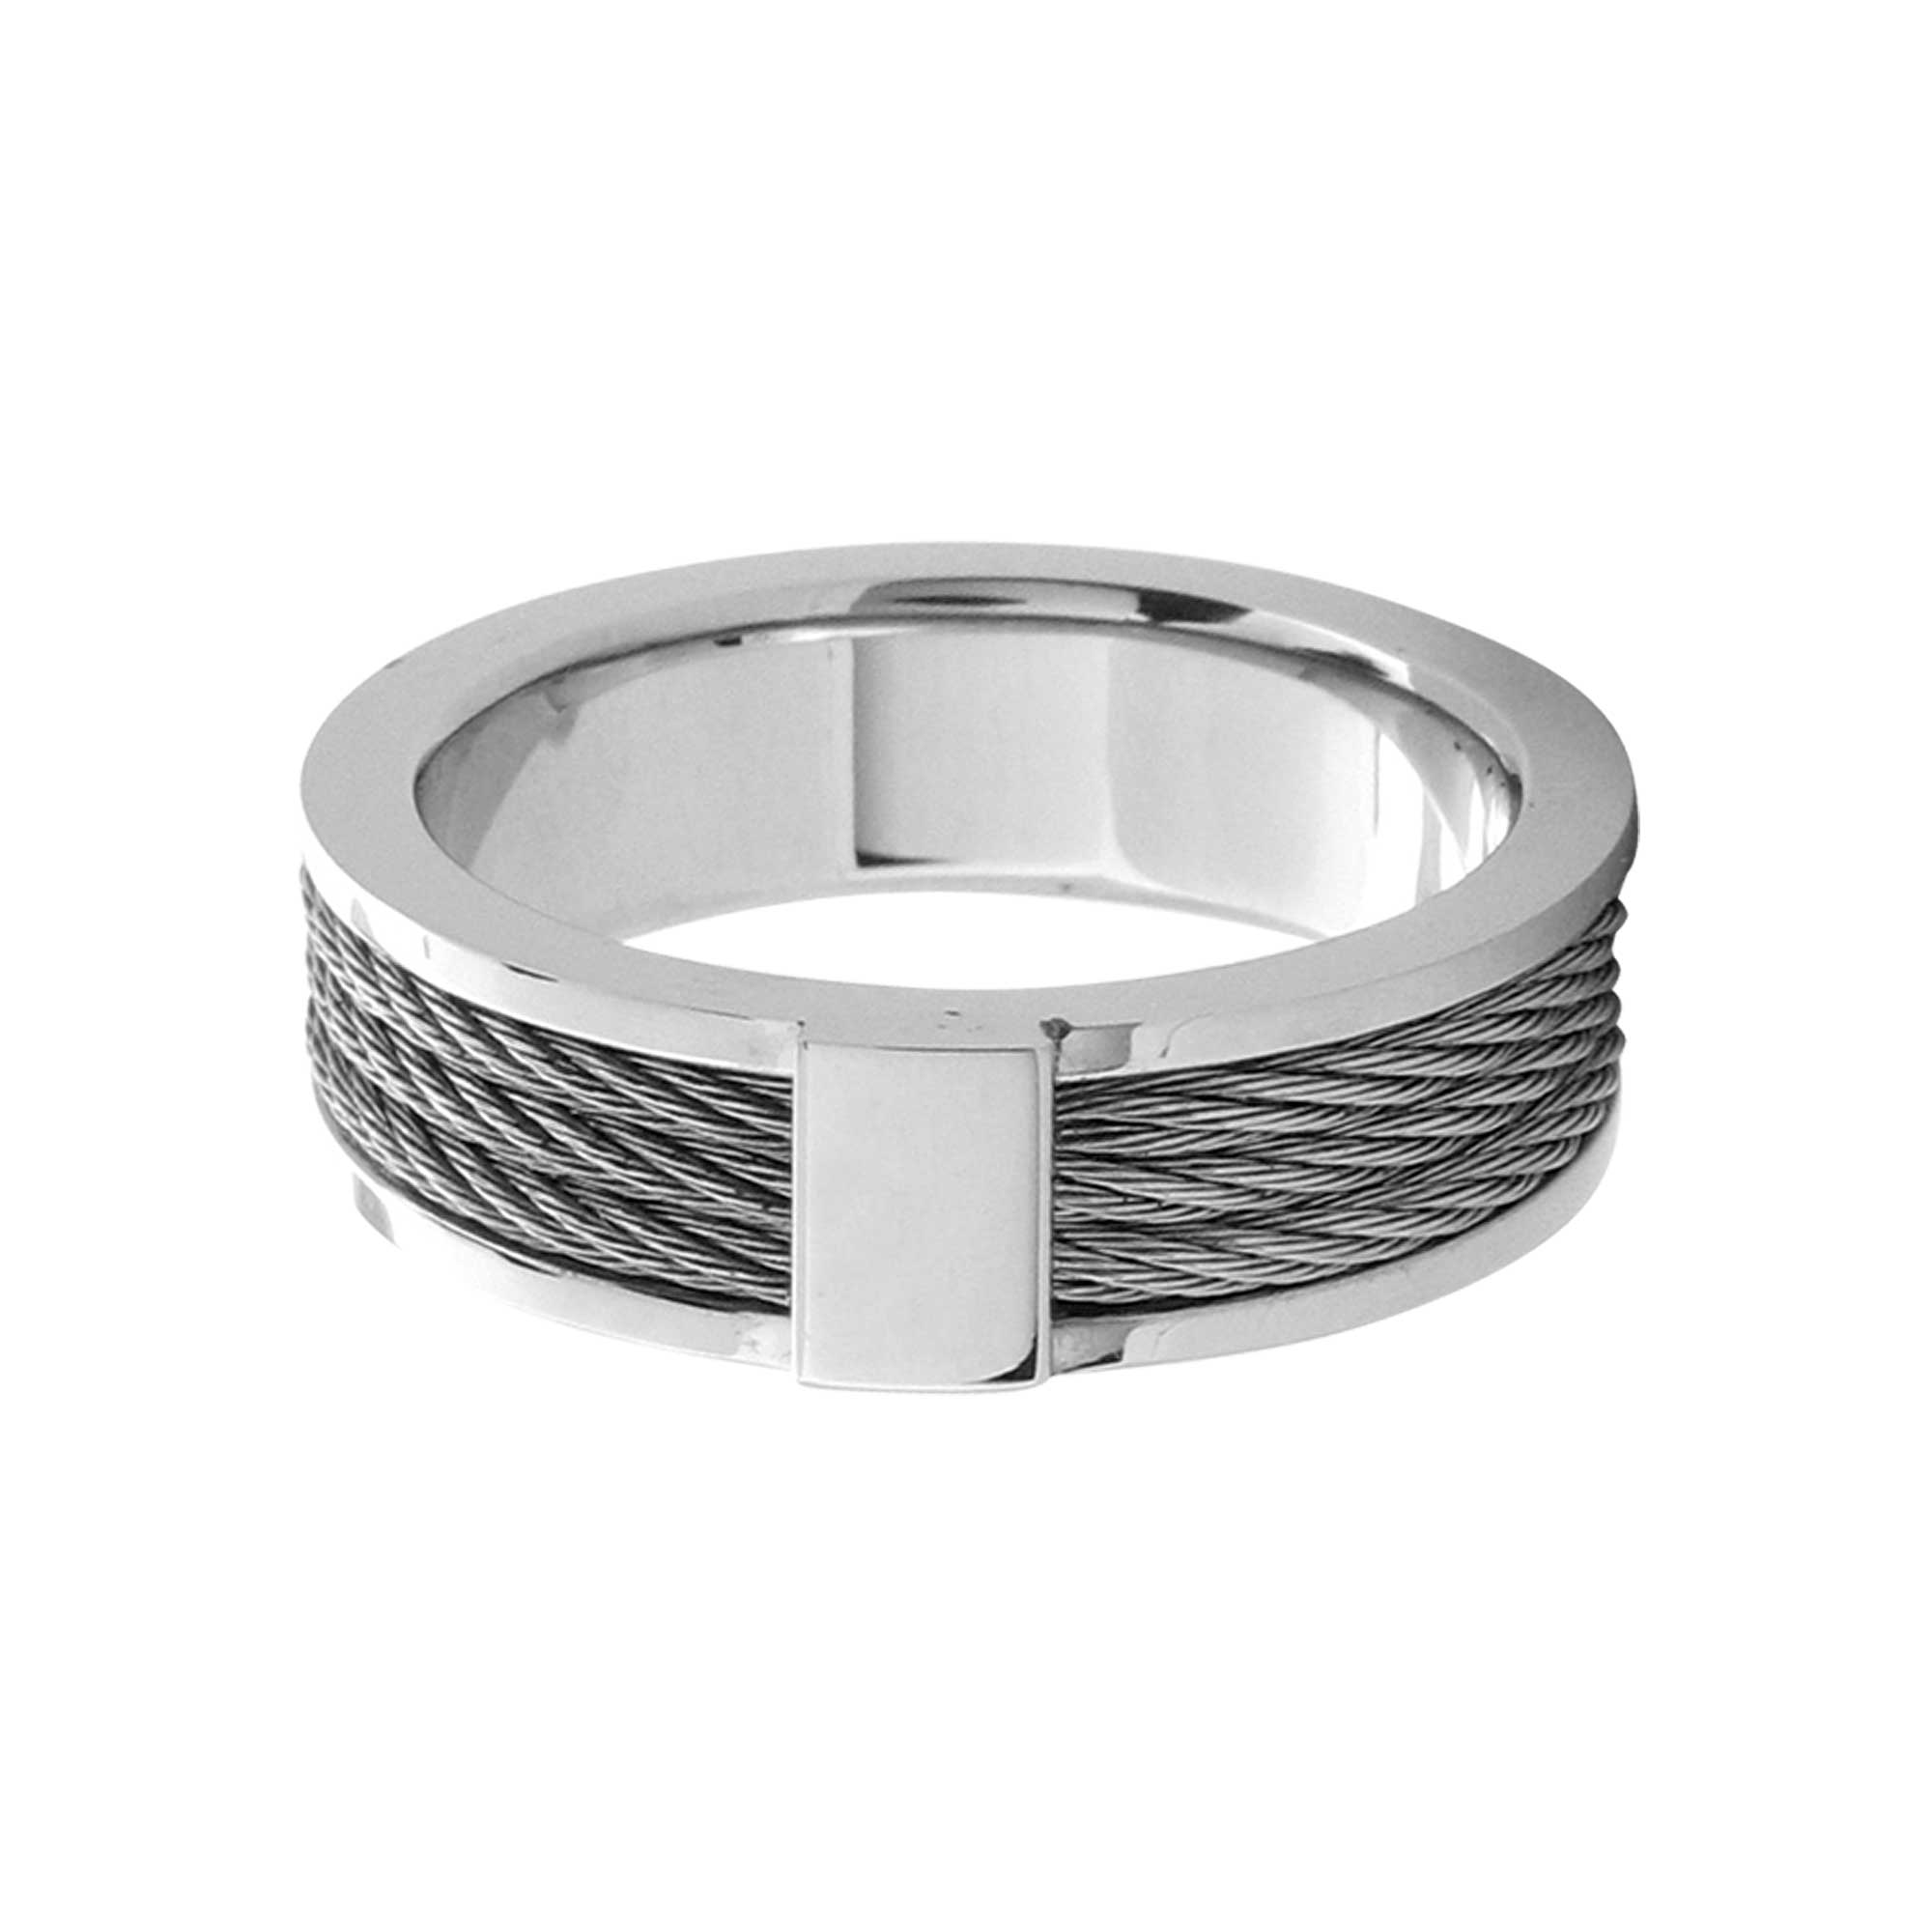 Steel Cable Inlayed Comfort Fit Ring Image 2 Ken Walker Jewelers Gig Harbor, WA